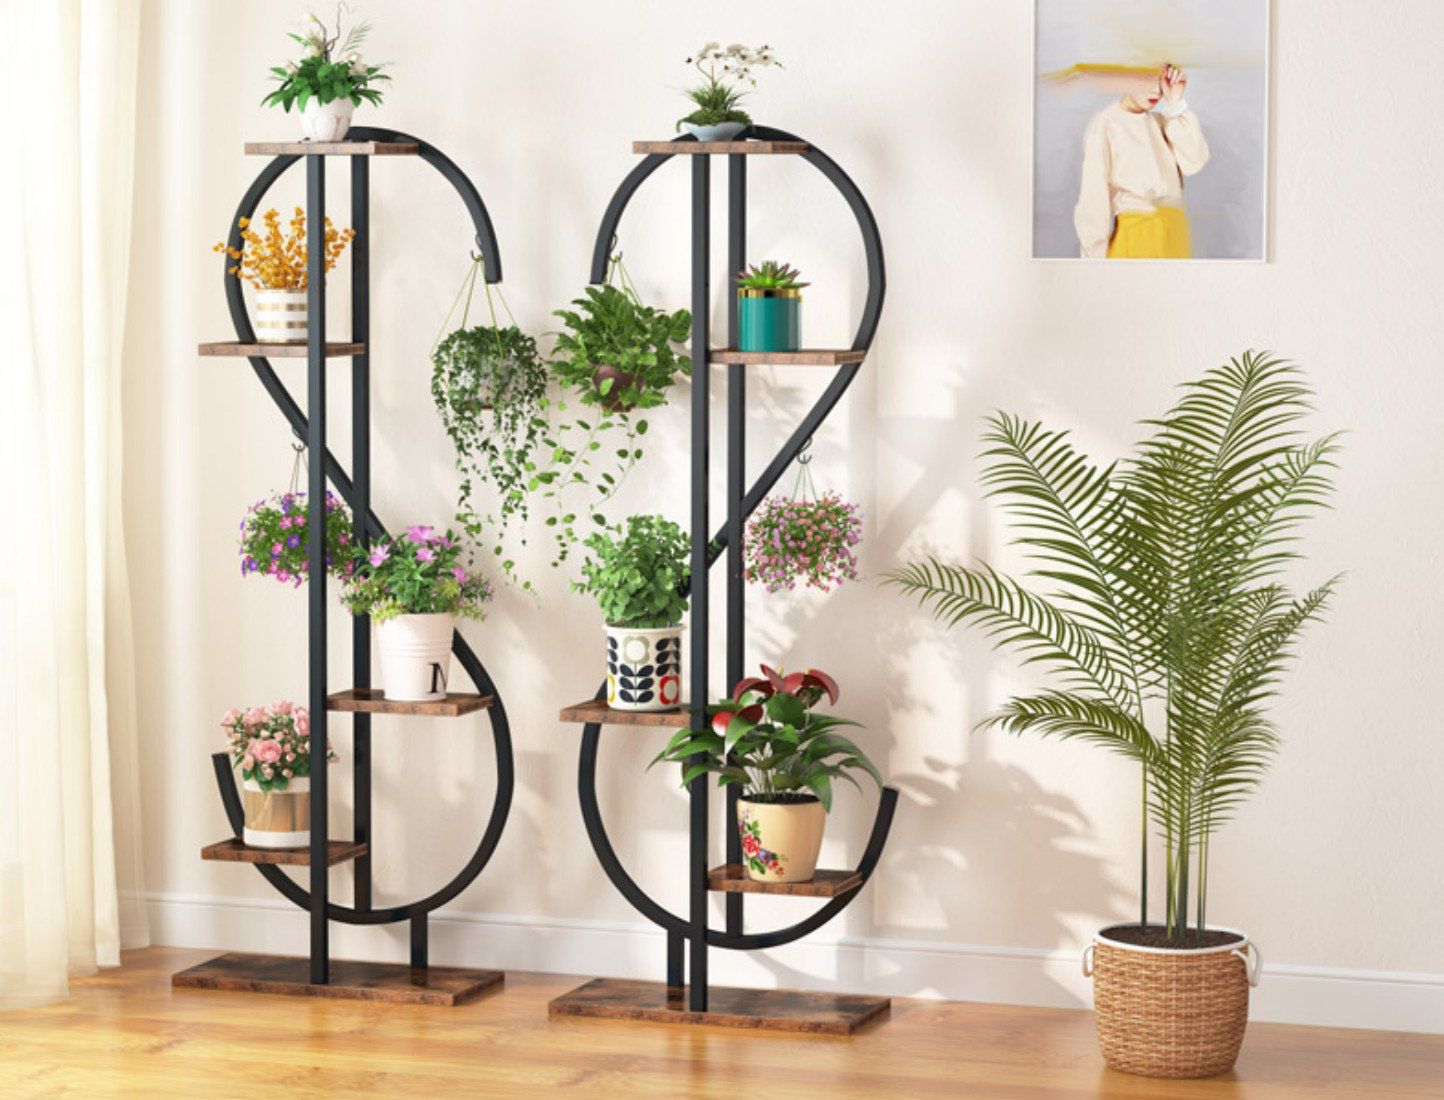 17 Stories Lazzat Rectangular Multi Tiered Plant Stand | Wayfair In Particle Board Plant Stands (View 11 of 15)